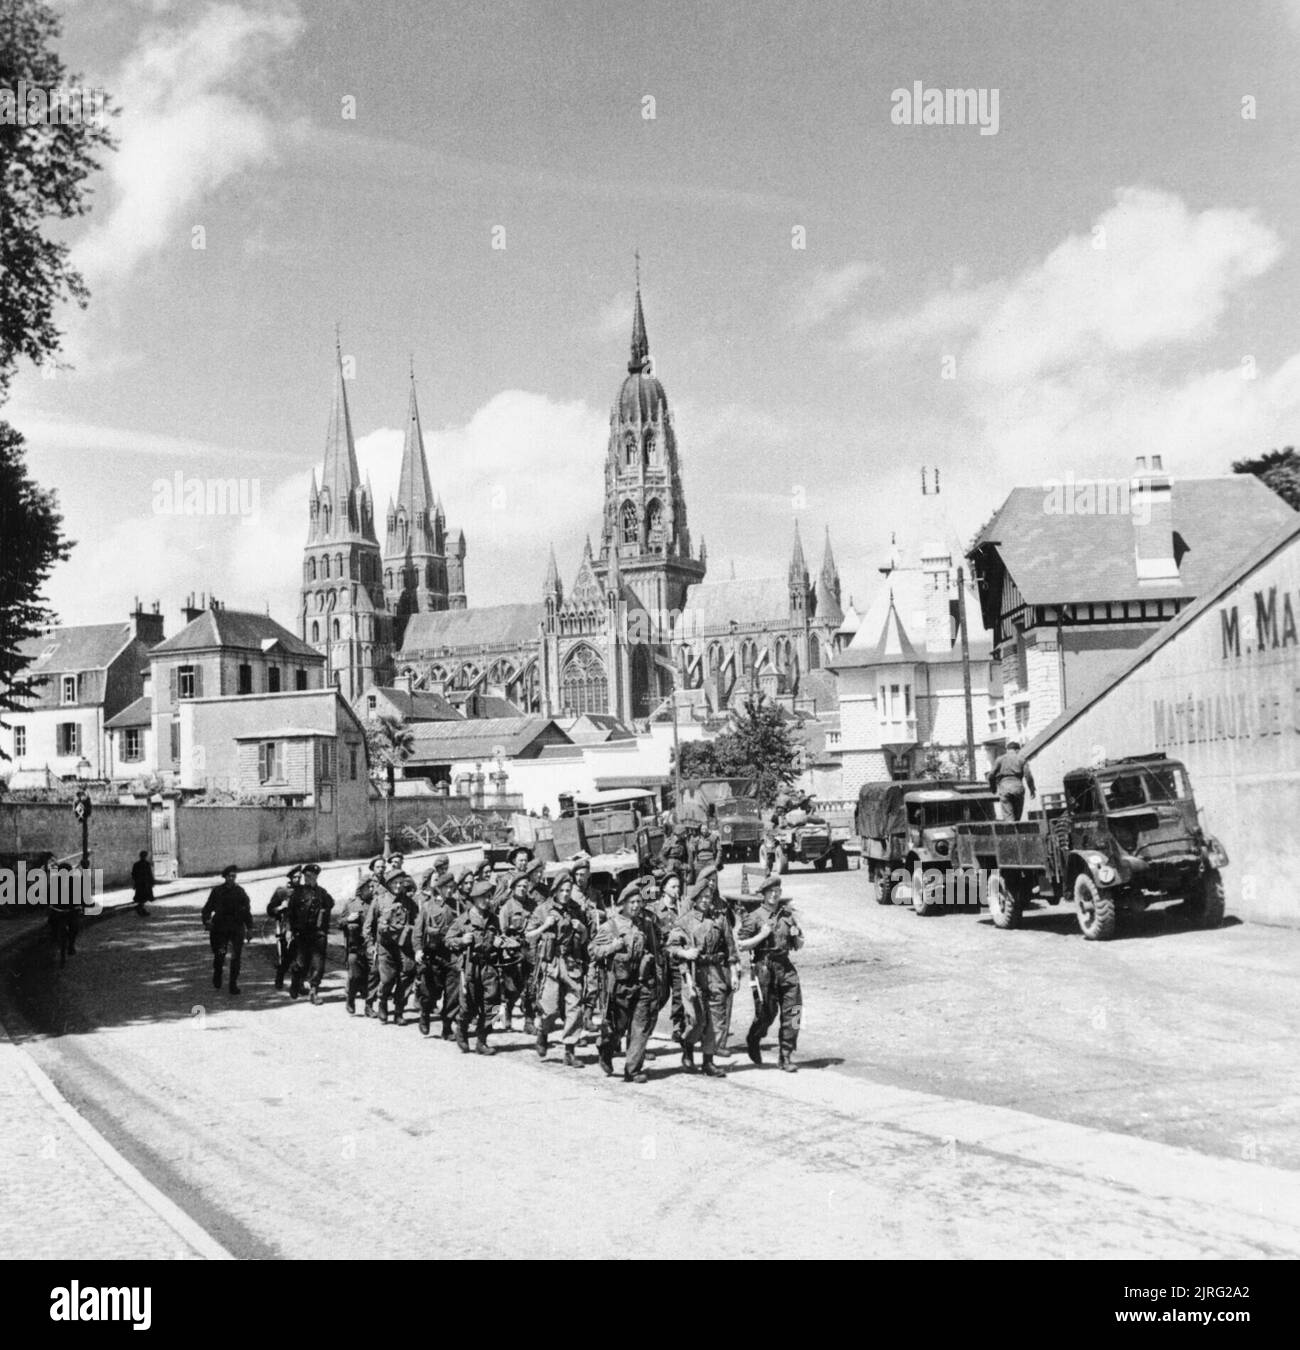 British troops marching through Bayeux in Normandy, 27 June 1944. Troops marching through Bayeux, with the cathedral in the background, 27 June 1944. Stock Photo